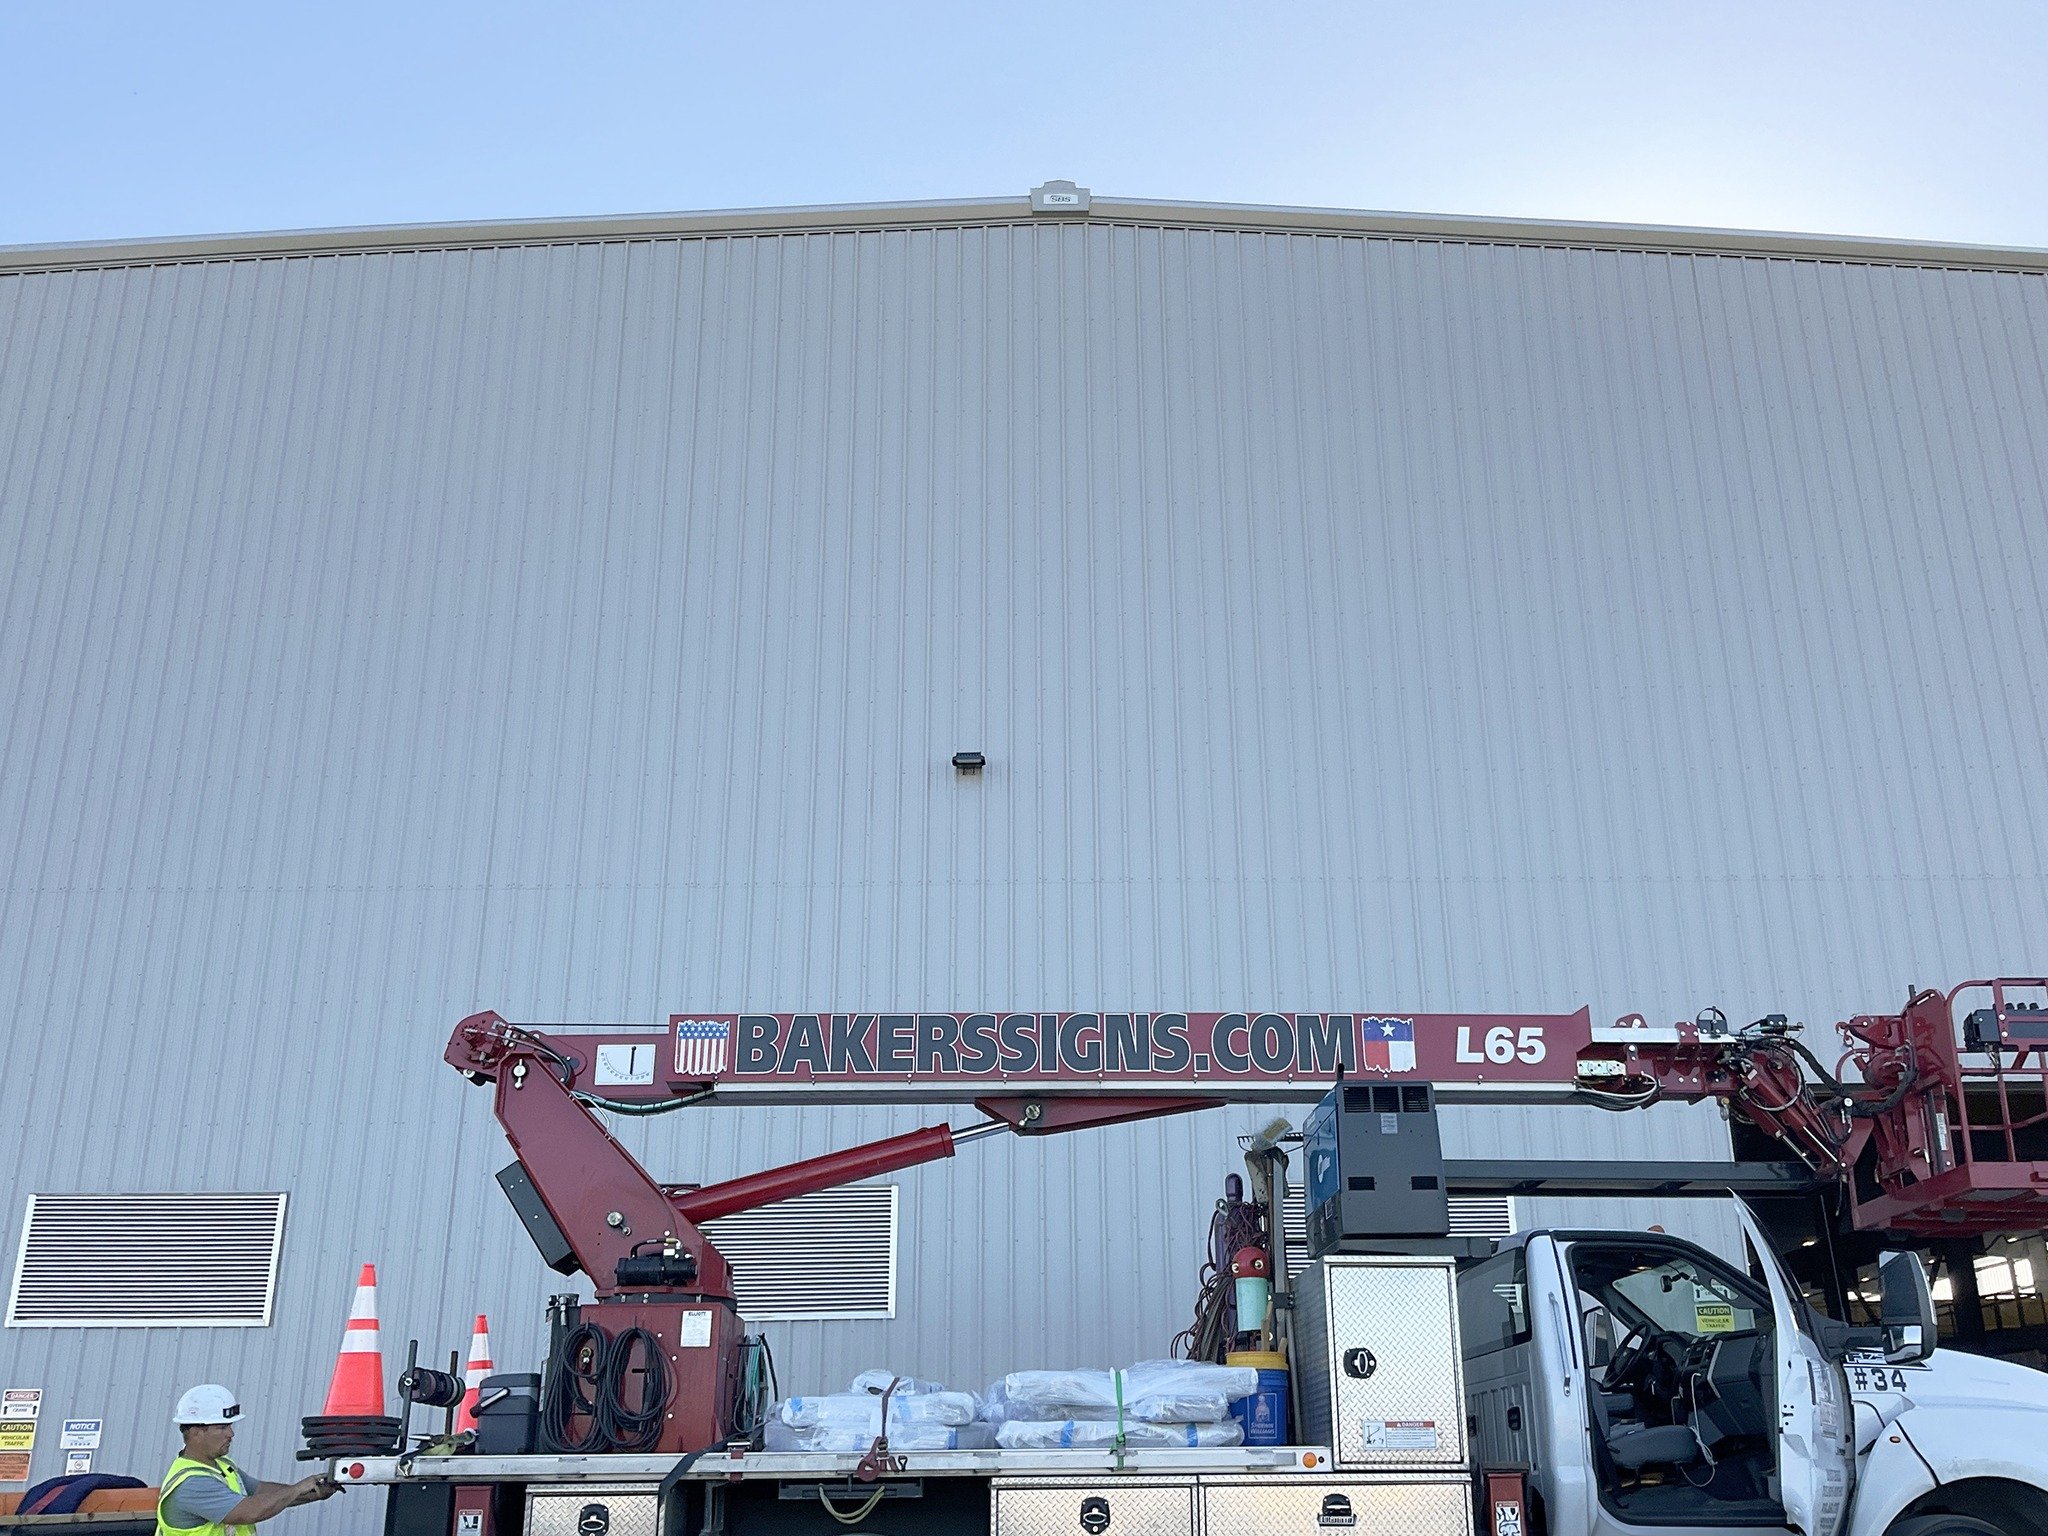 New LED illuminated channel letters for Borusan Pipe. Bakers Team got it completed just ahead of the rough weather and helped create another happy customer of BAKERS' SIGNS AND MANUFACTURING, INC 
#bakerssigns #channelsigns #signinstallation #teambak